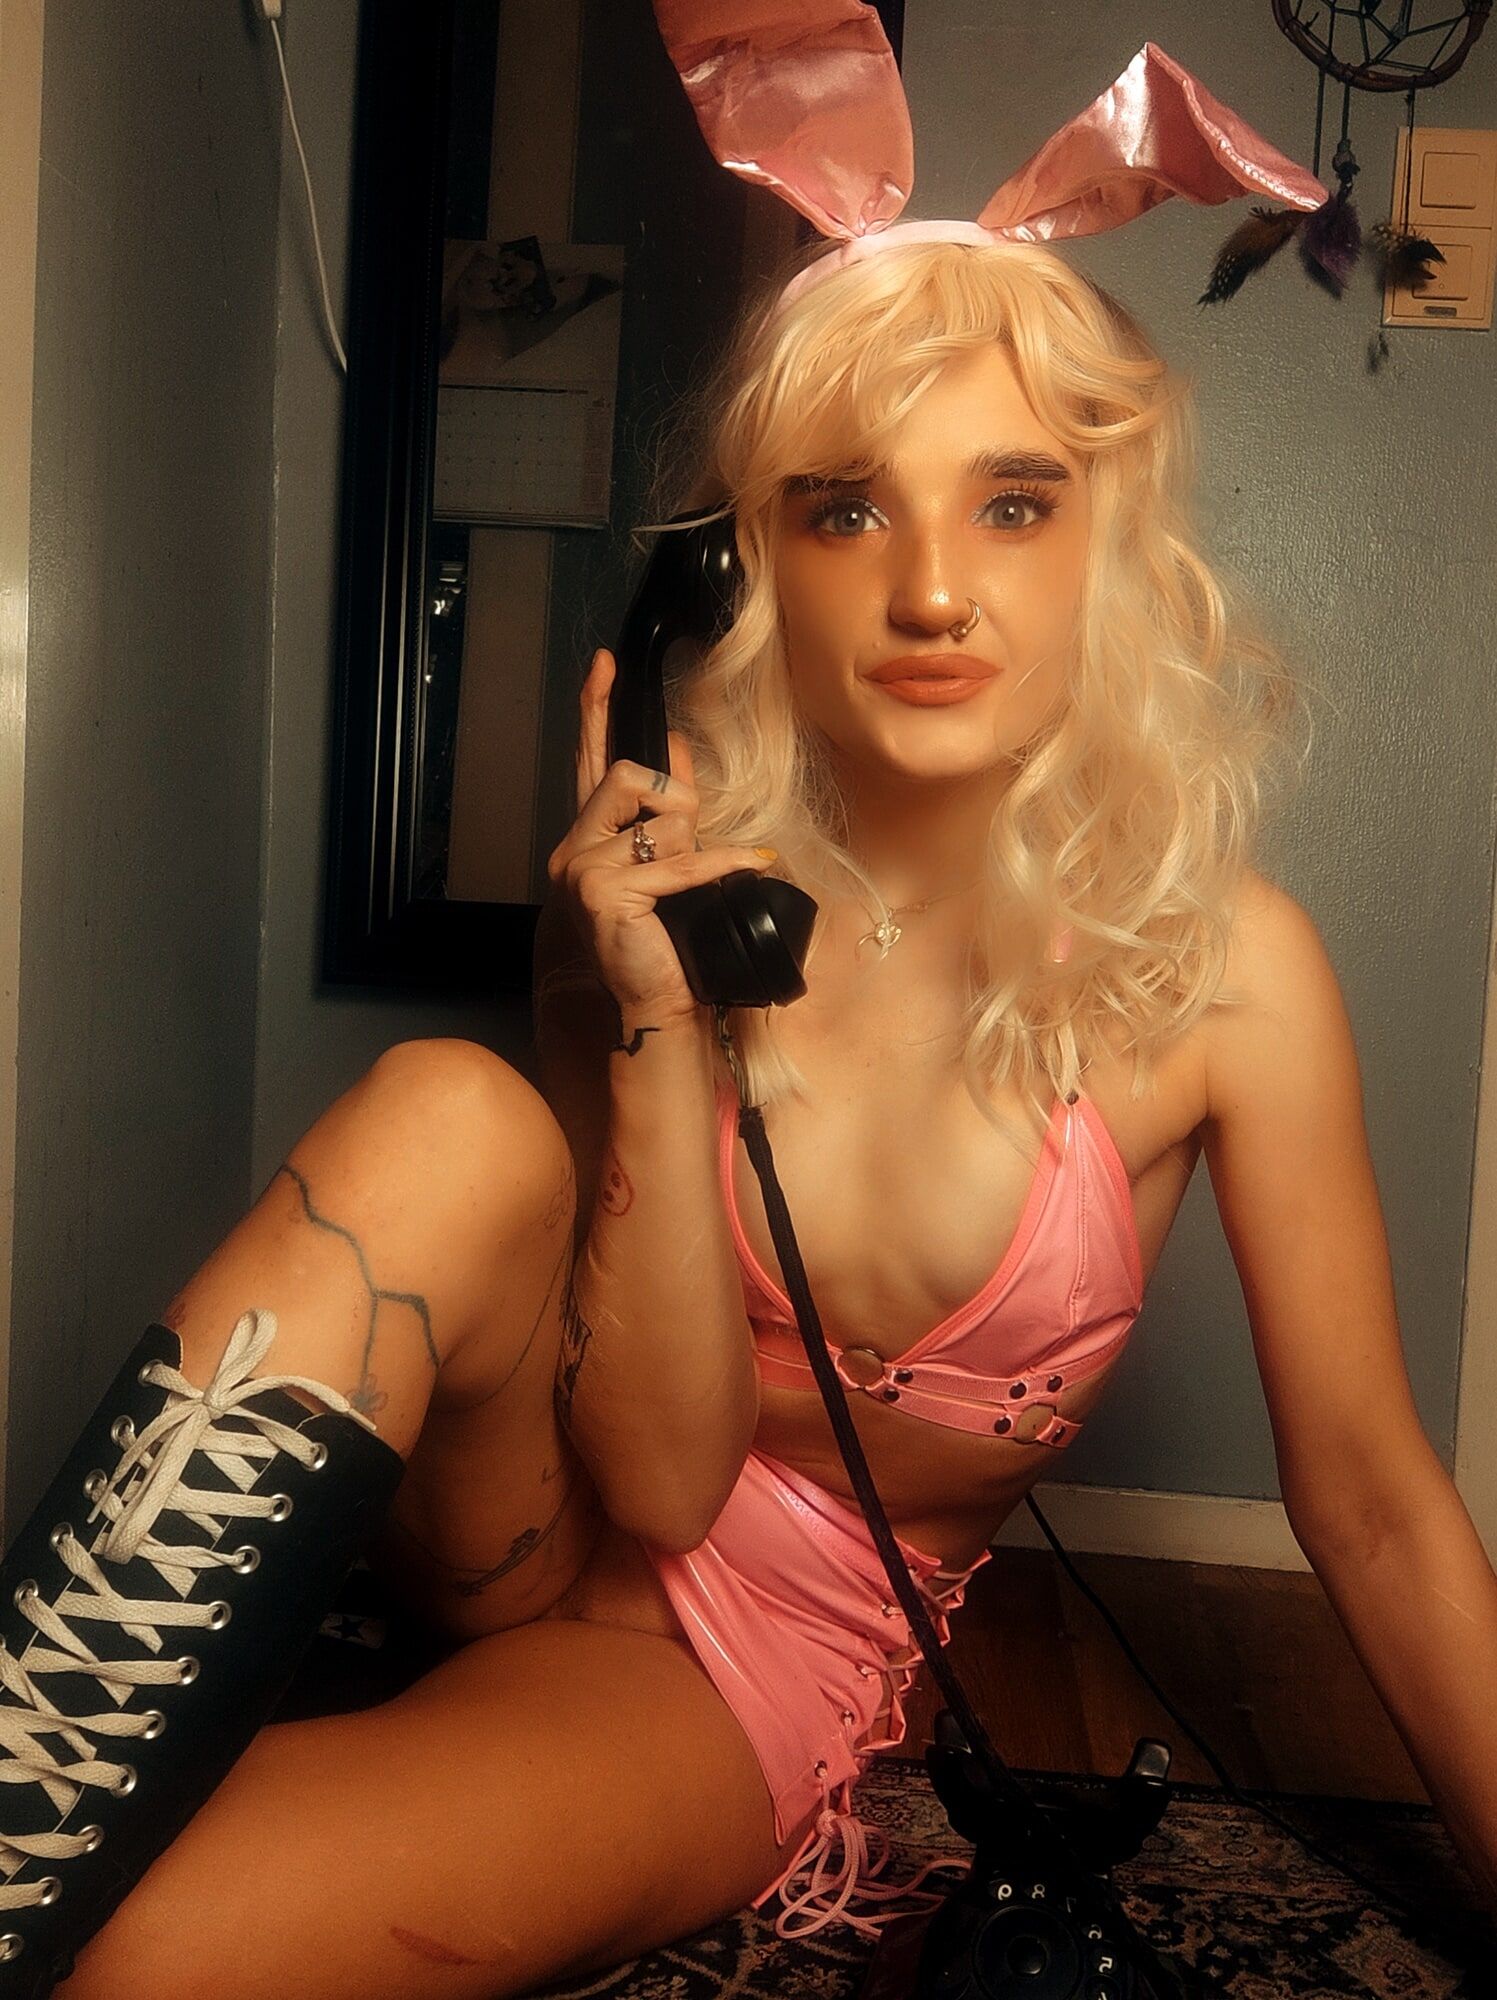 Pink bunny talking on the phone while showing off pussy #17